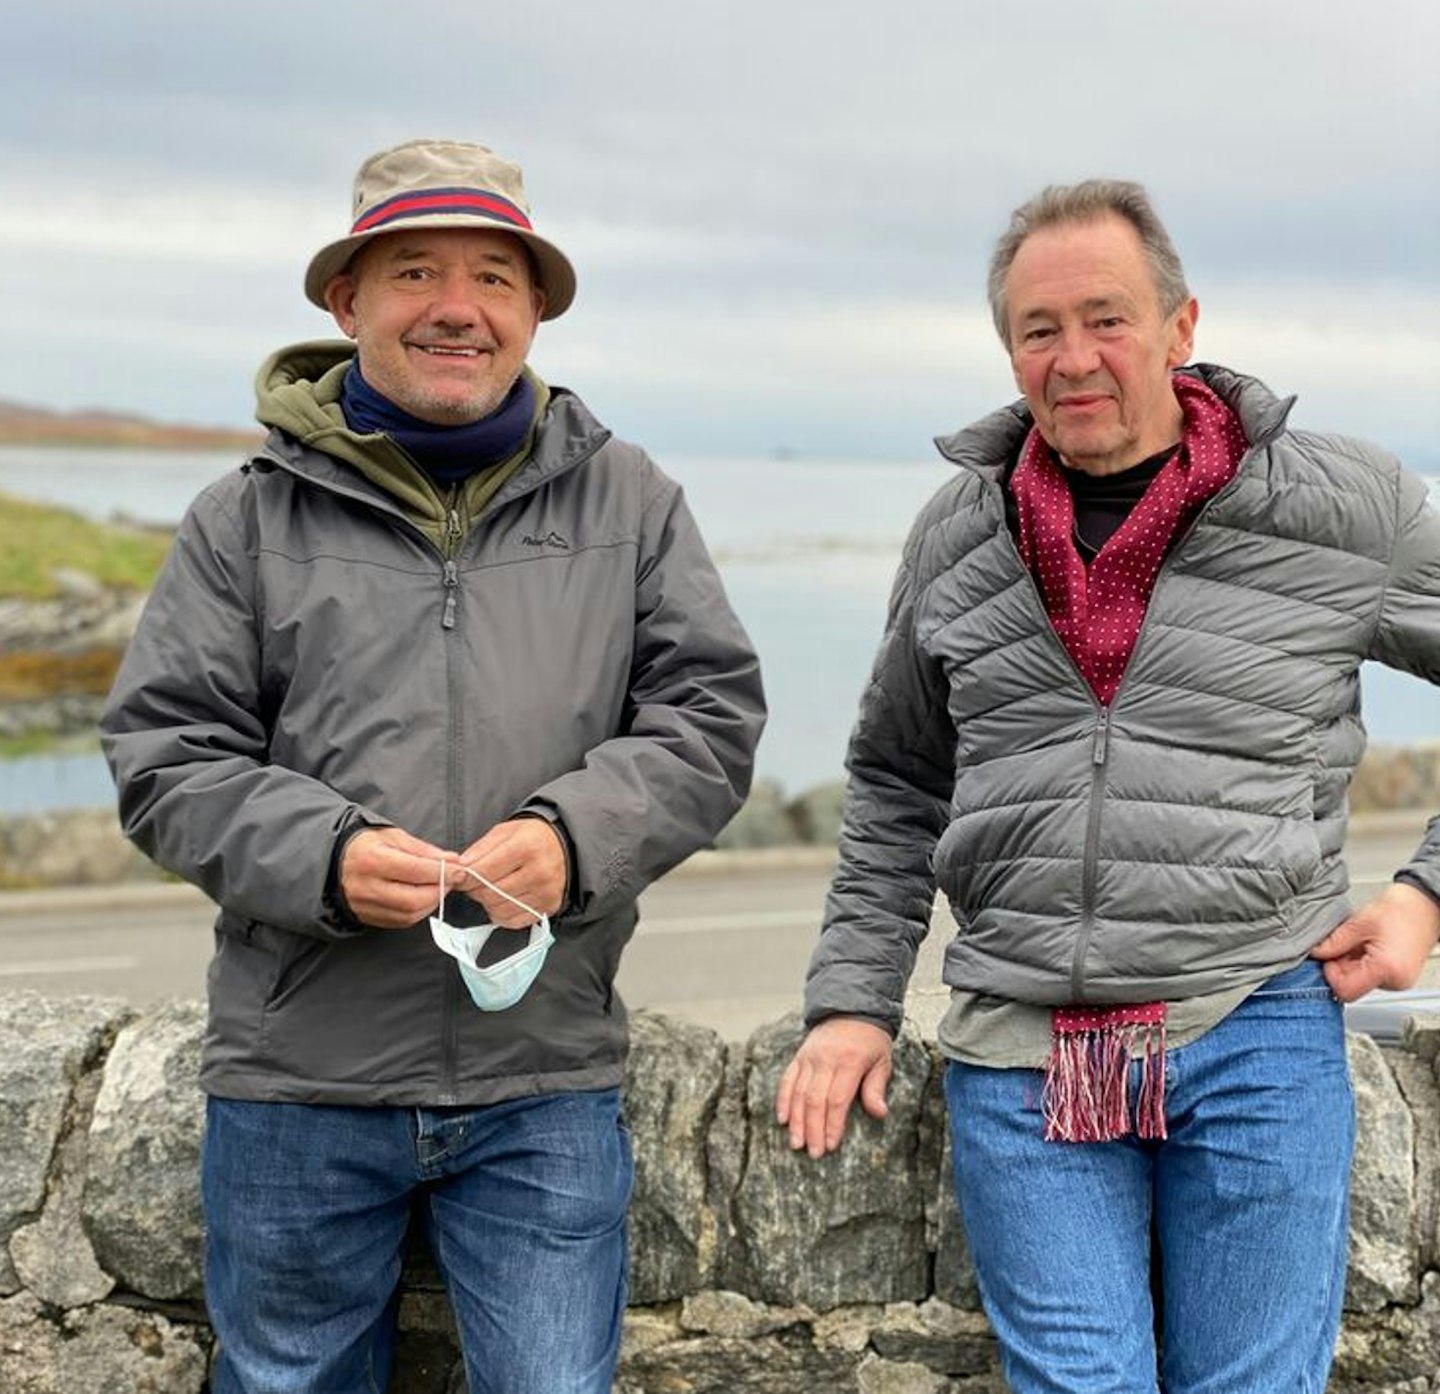 COMEDY duo Bob Mortimer and Paul Whitehouse launched their fourth series of Gone Fishing